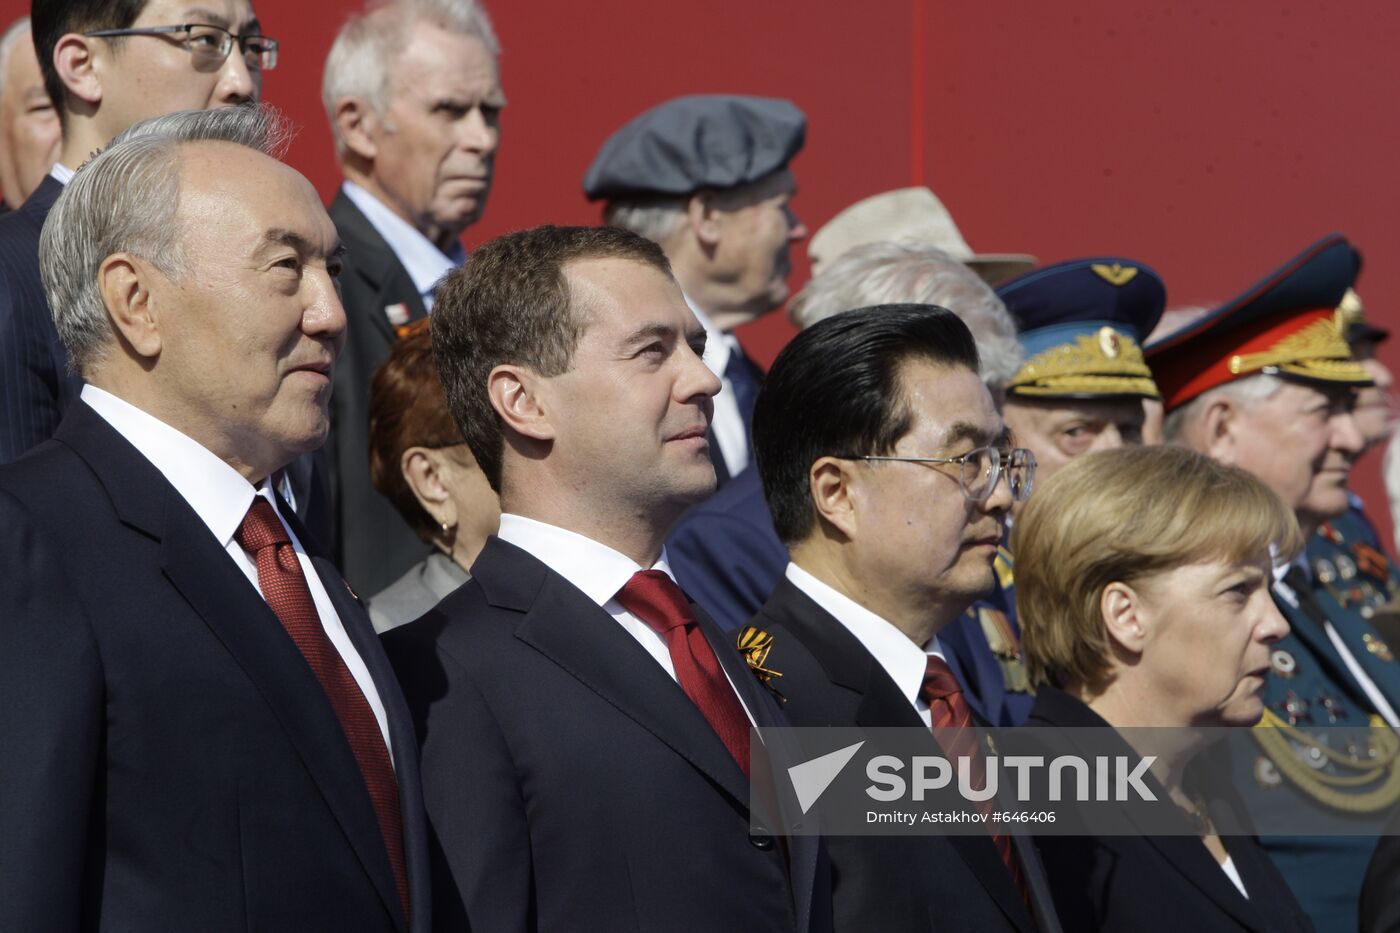 Medvedev at parade on 65th anniversary of VE Day